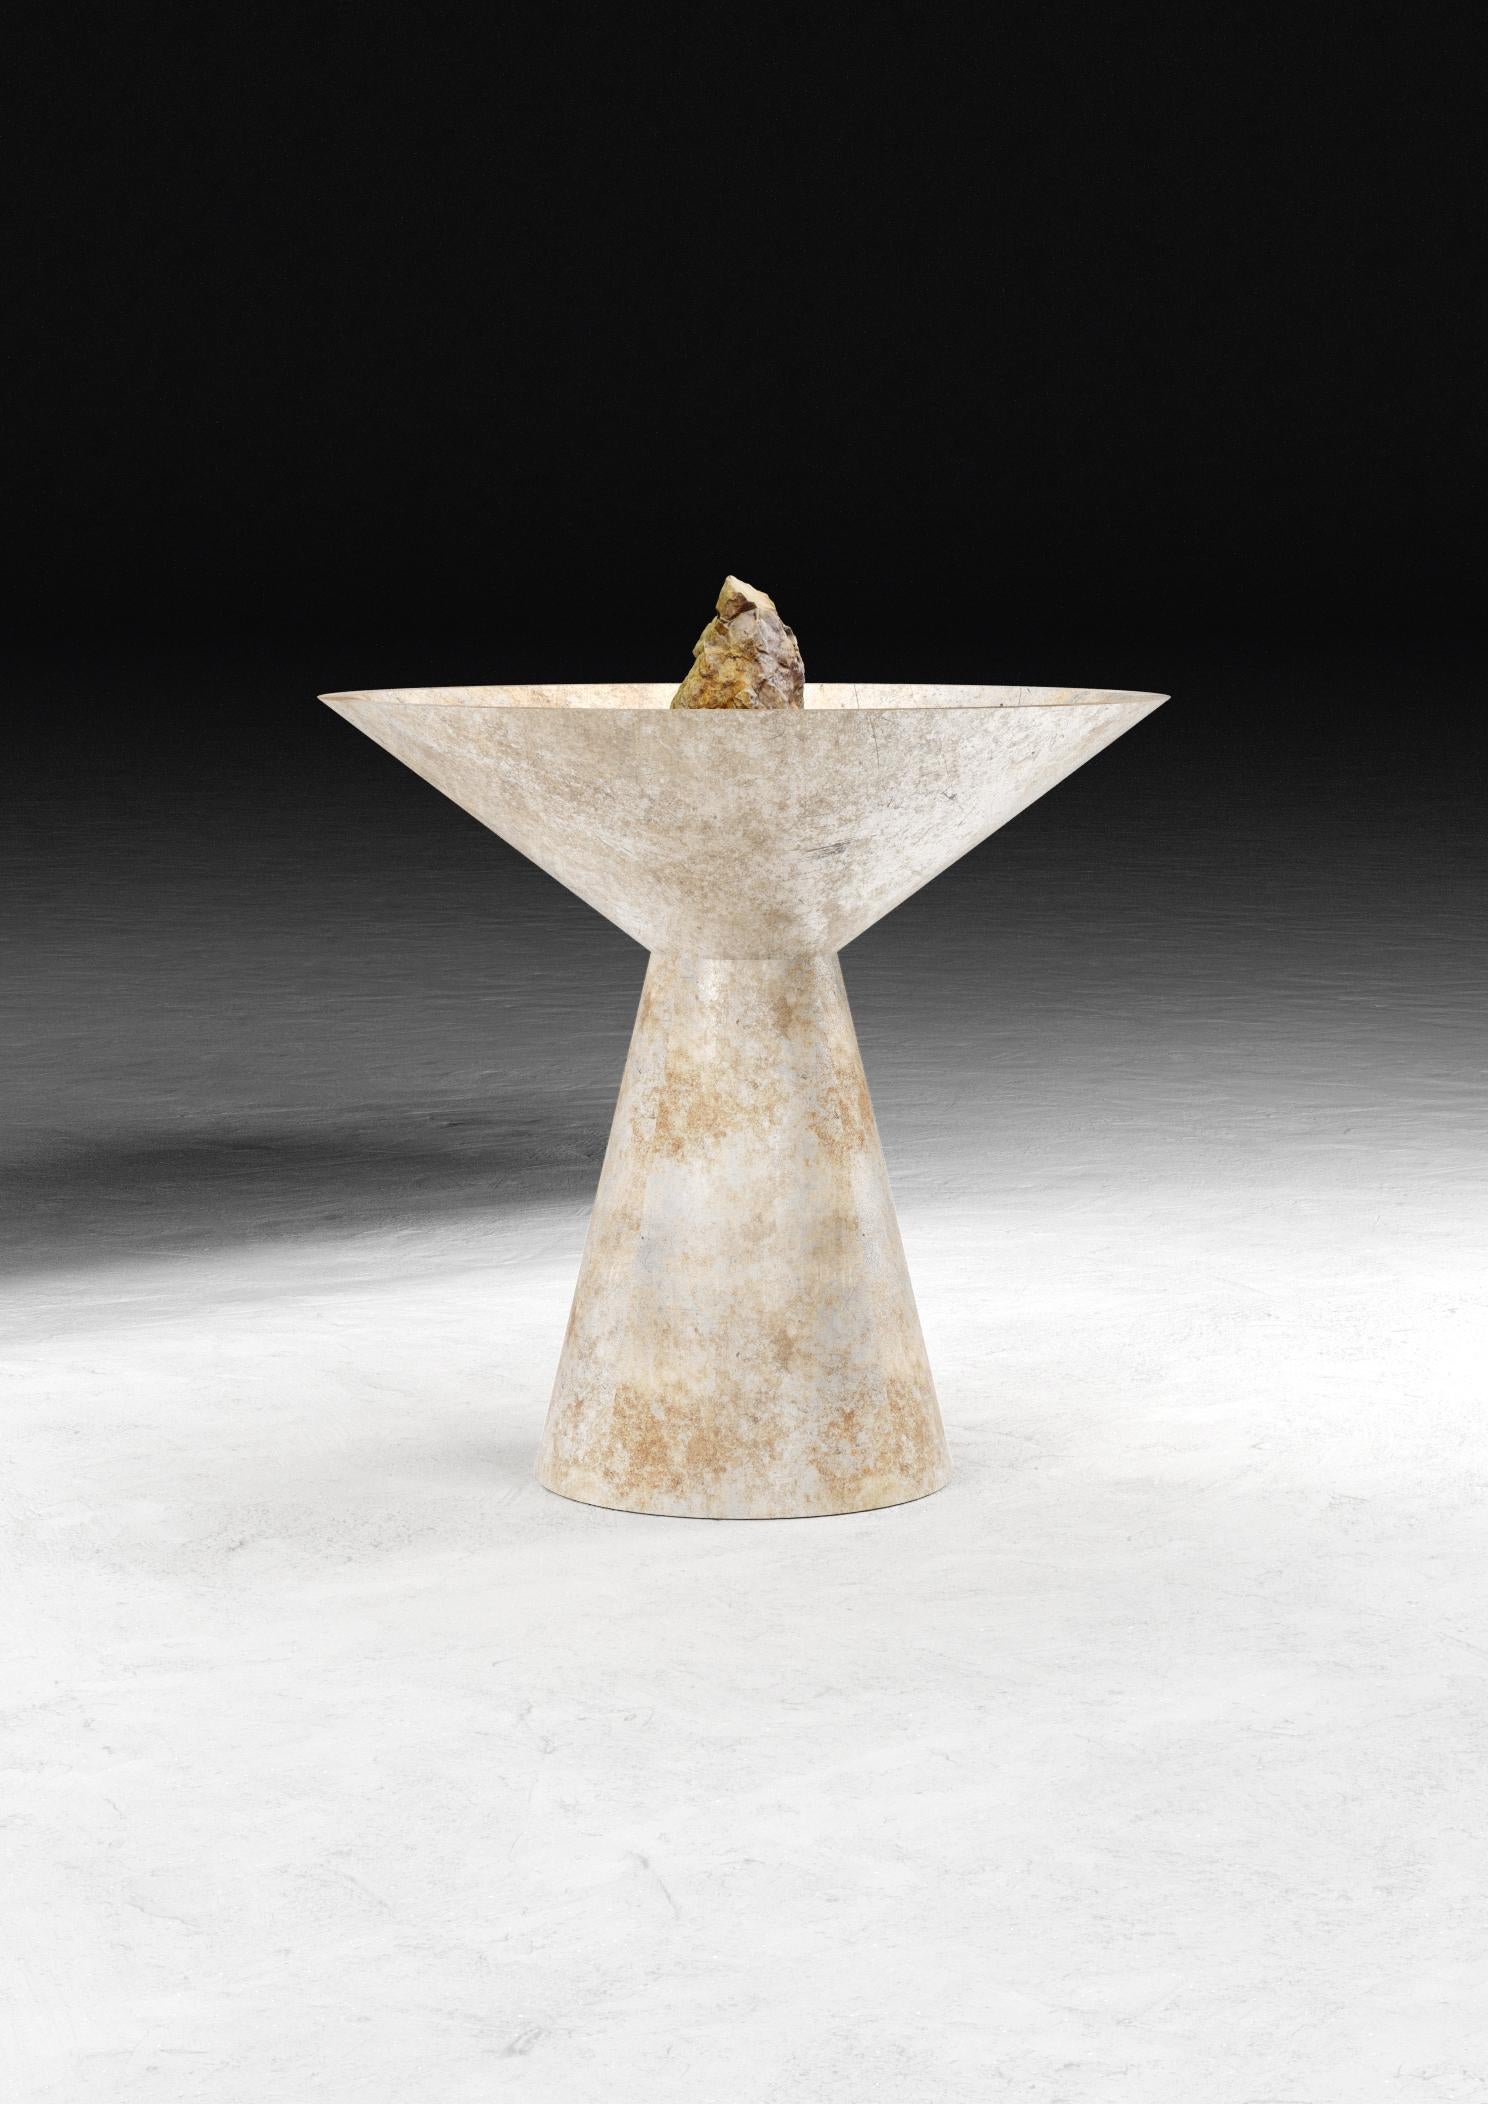 Fountain With Stone, Pertrified Wood by Pierre De Valck
One of a kind
Dimensions: W 110 x D 110 x H 100 cm.
Materials: Stone, Petrified wood, white patinated bronze.

Fountain with stone (Pertrified Wood). White patinated bronze
Provenance: